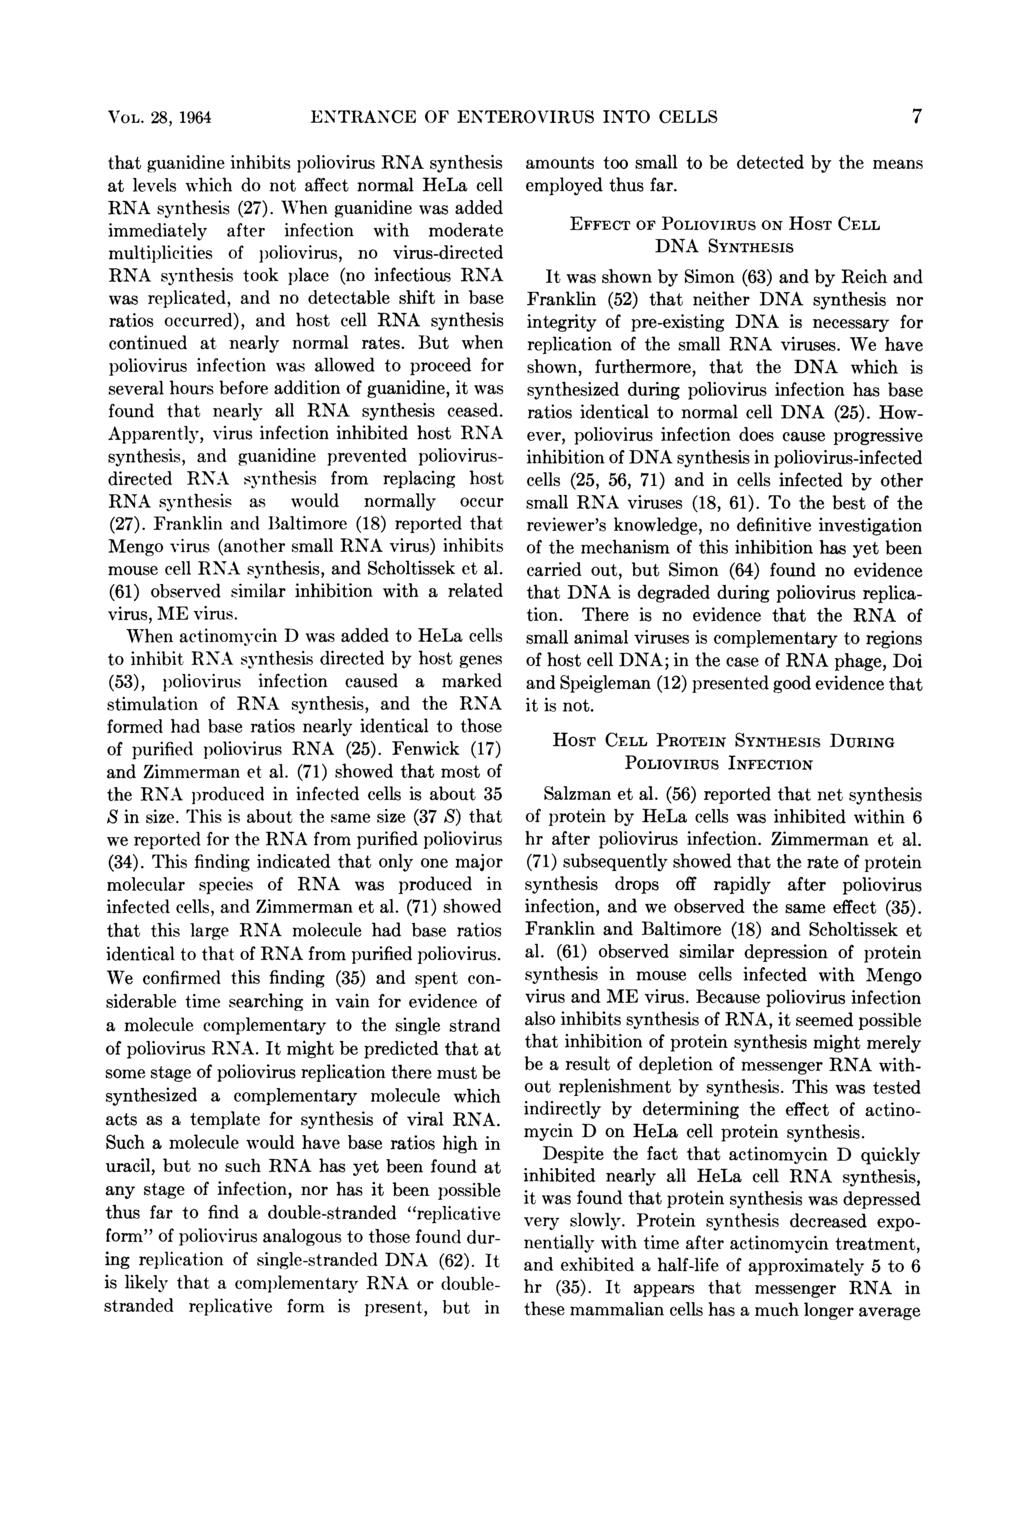 VOL. 28, 1964 ENTRANCE OF ENTEROVIRUS INTO CELLS 7 that guanidine inhibits poliovirus RNA synthesis at levels which do not affect normal HeLa cell RNA synthesis (27).